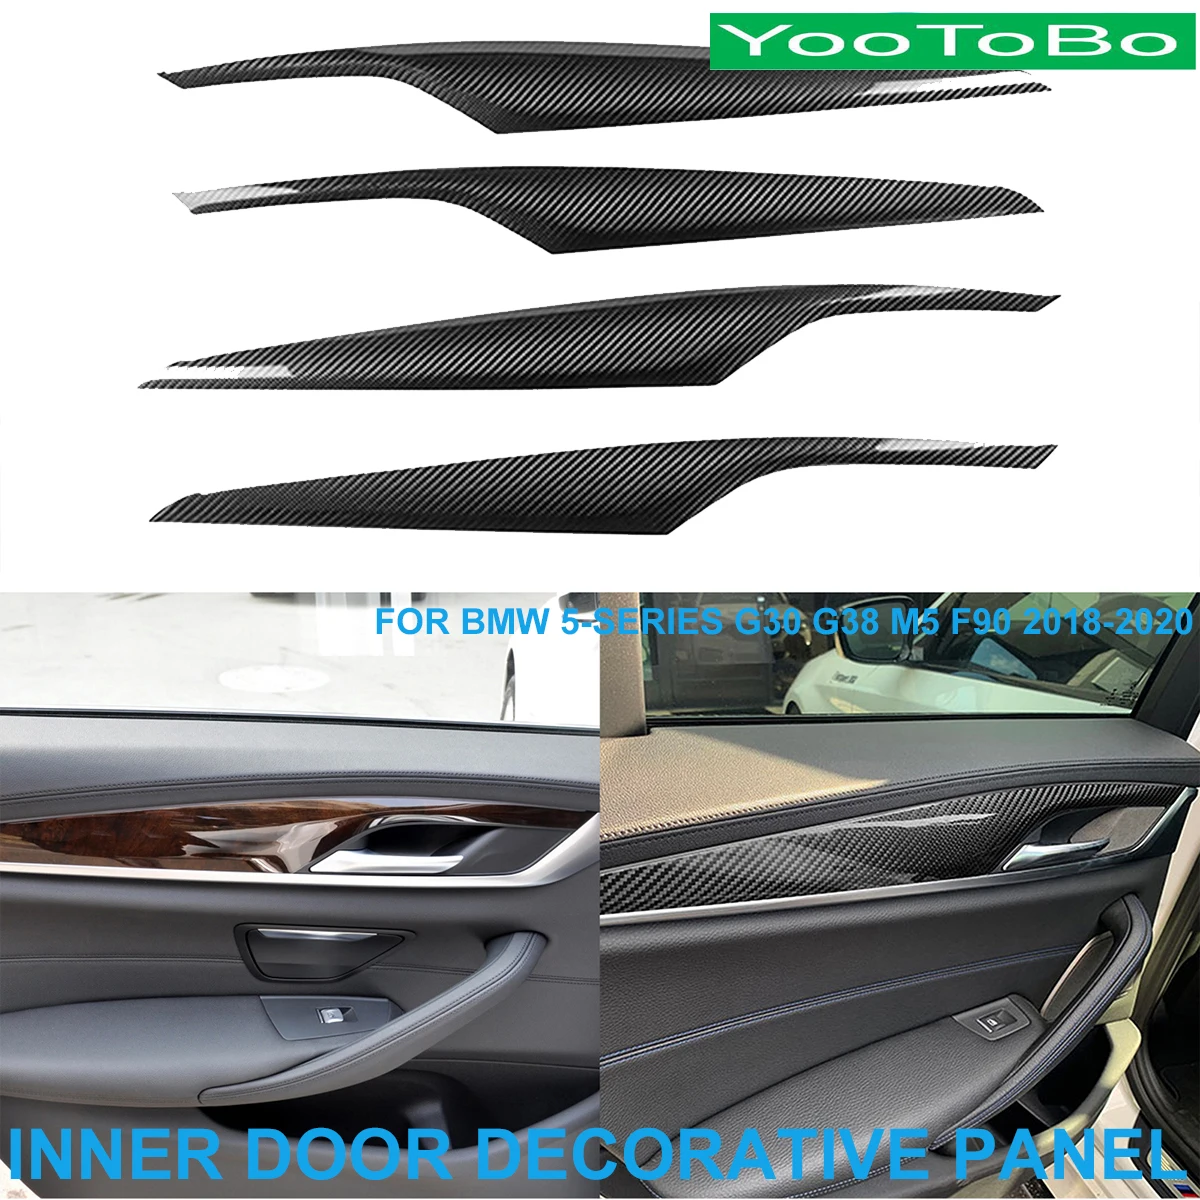 

LHD RHD Car Styling Real Carbon Fiber Interior Inner Door Decorative Panel Cover Trim Sticker For BMW 5-Series G30 G38 2018-2020